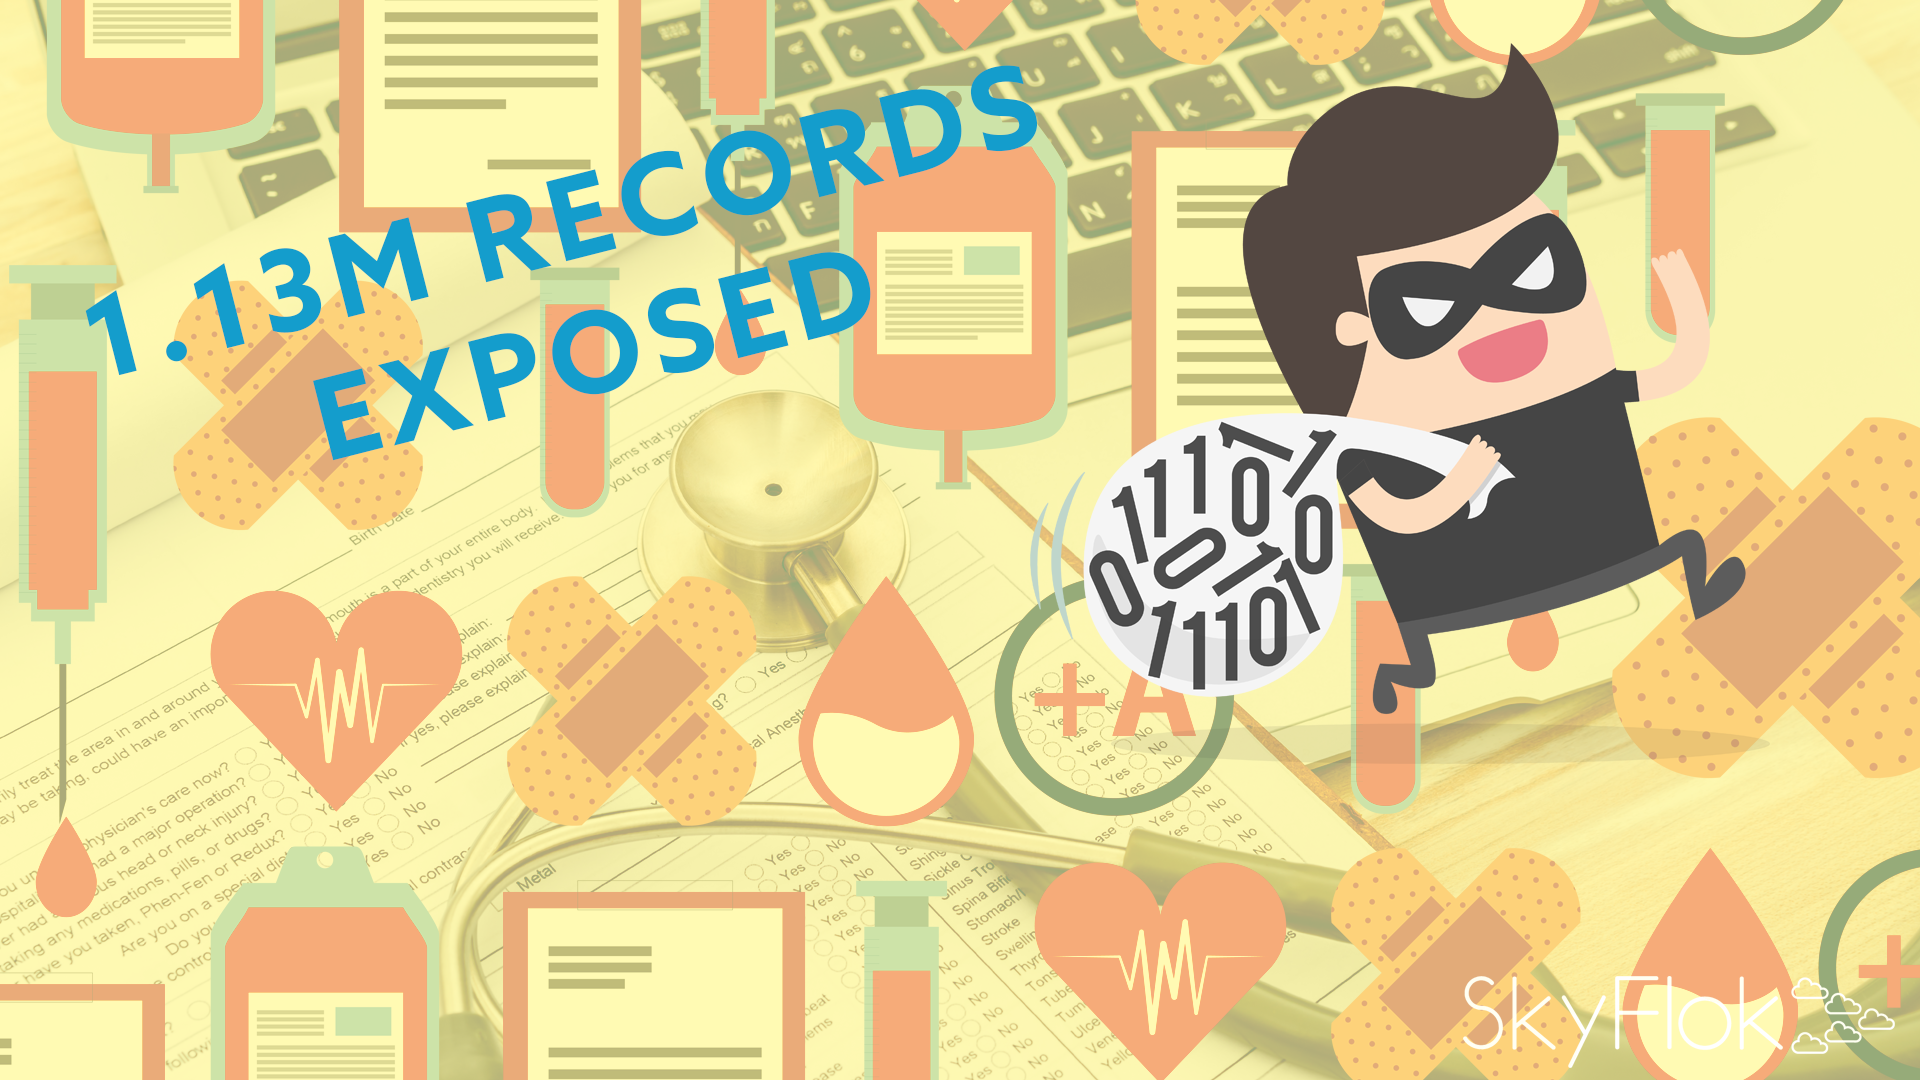 You are currently viewing 1.13M Records Exposed by 110 Healthcare Data Breaches in Q1 2018